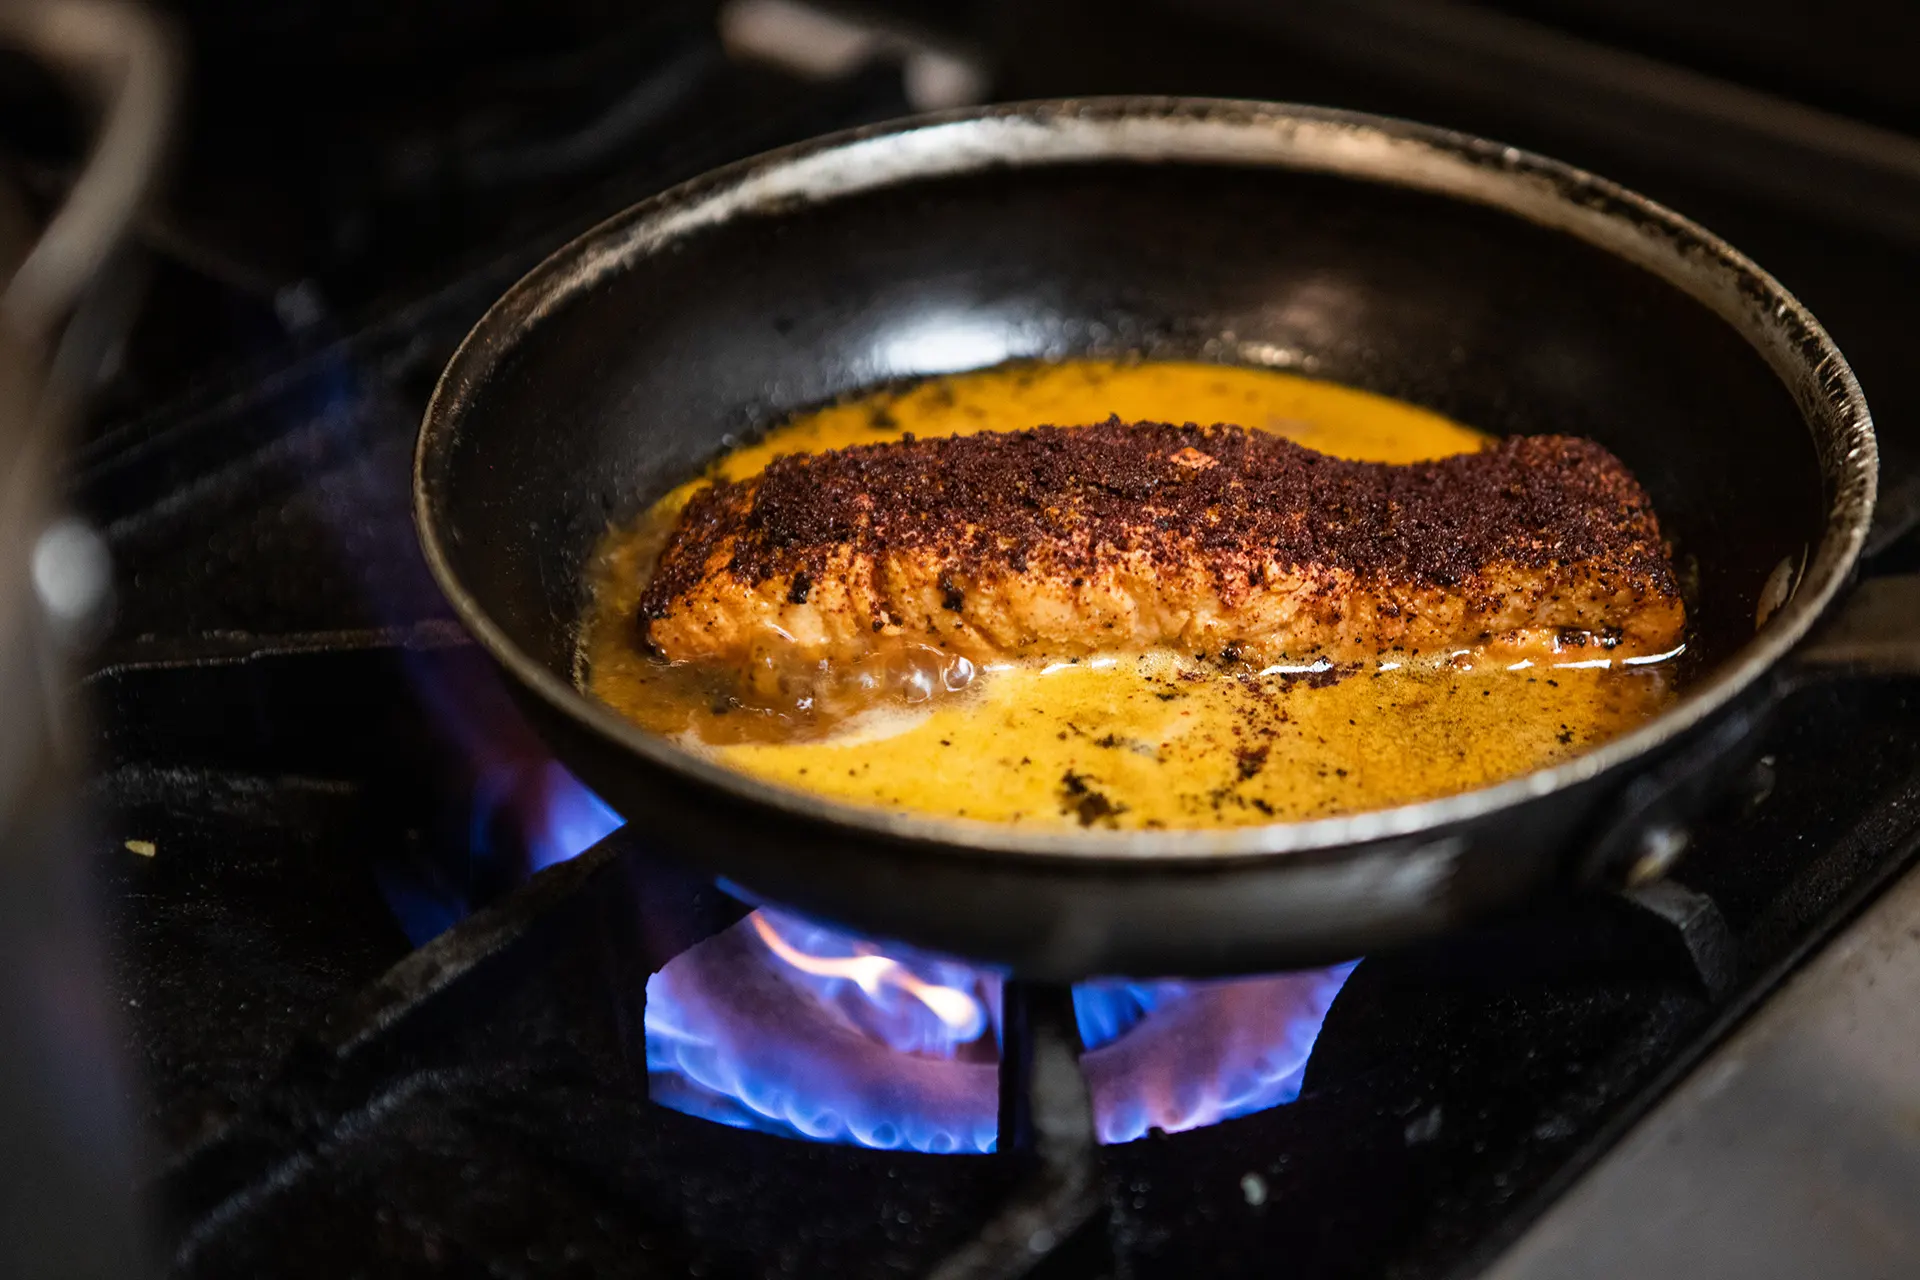 The Mediterranean Salmon is cooking in a sauté pan with brightly colored orange sauce. A vibrant blue and purple stove top flame can be seen underneath the sauté pan.